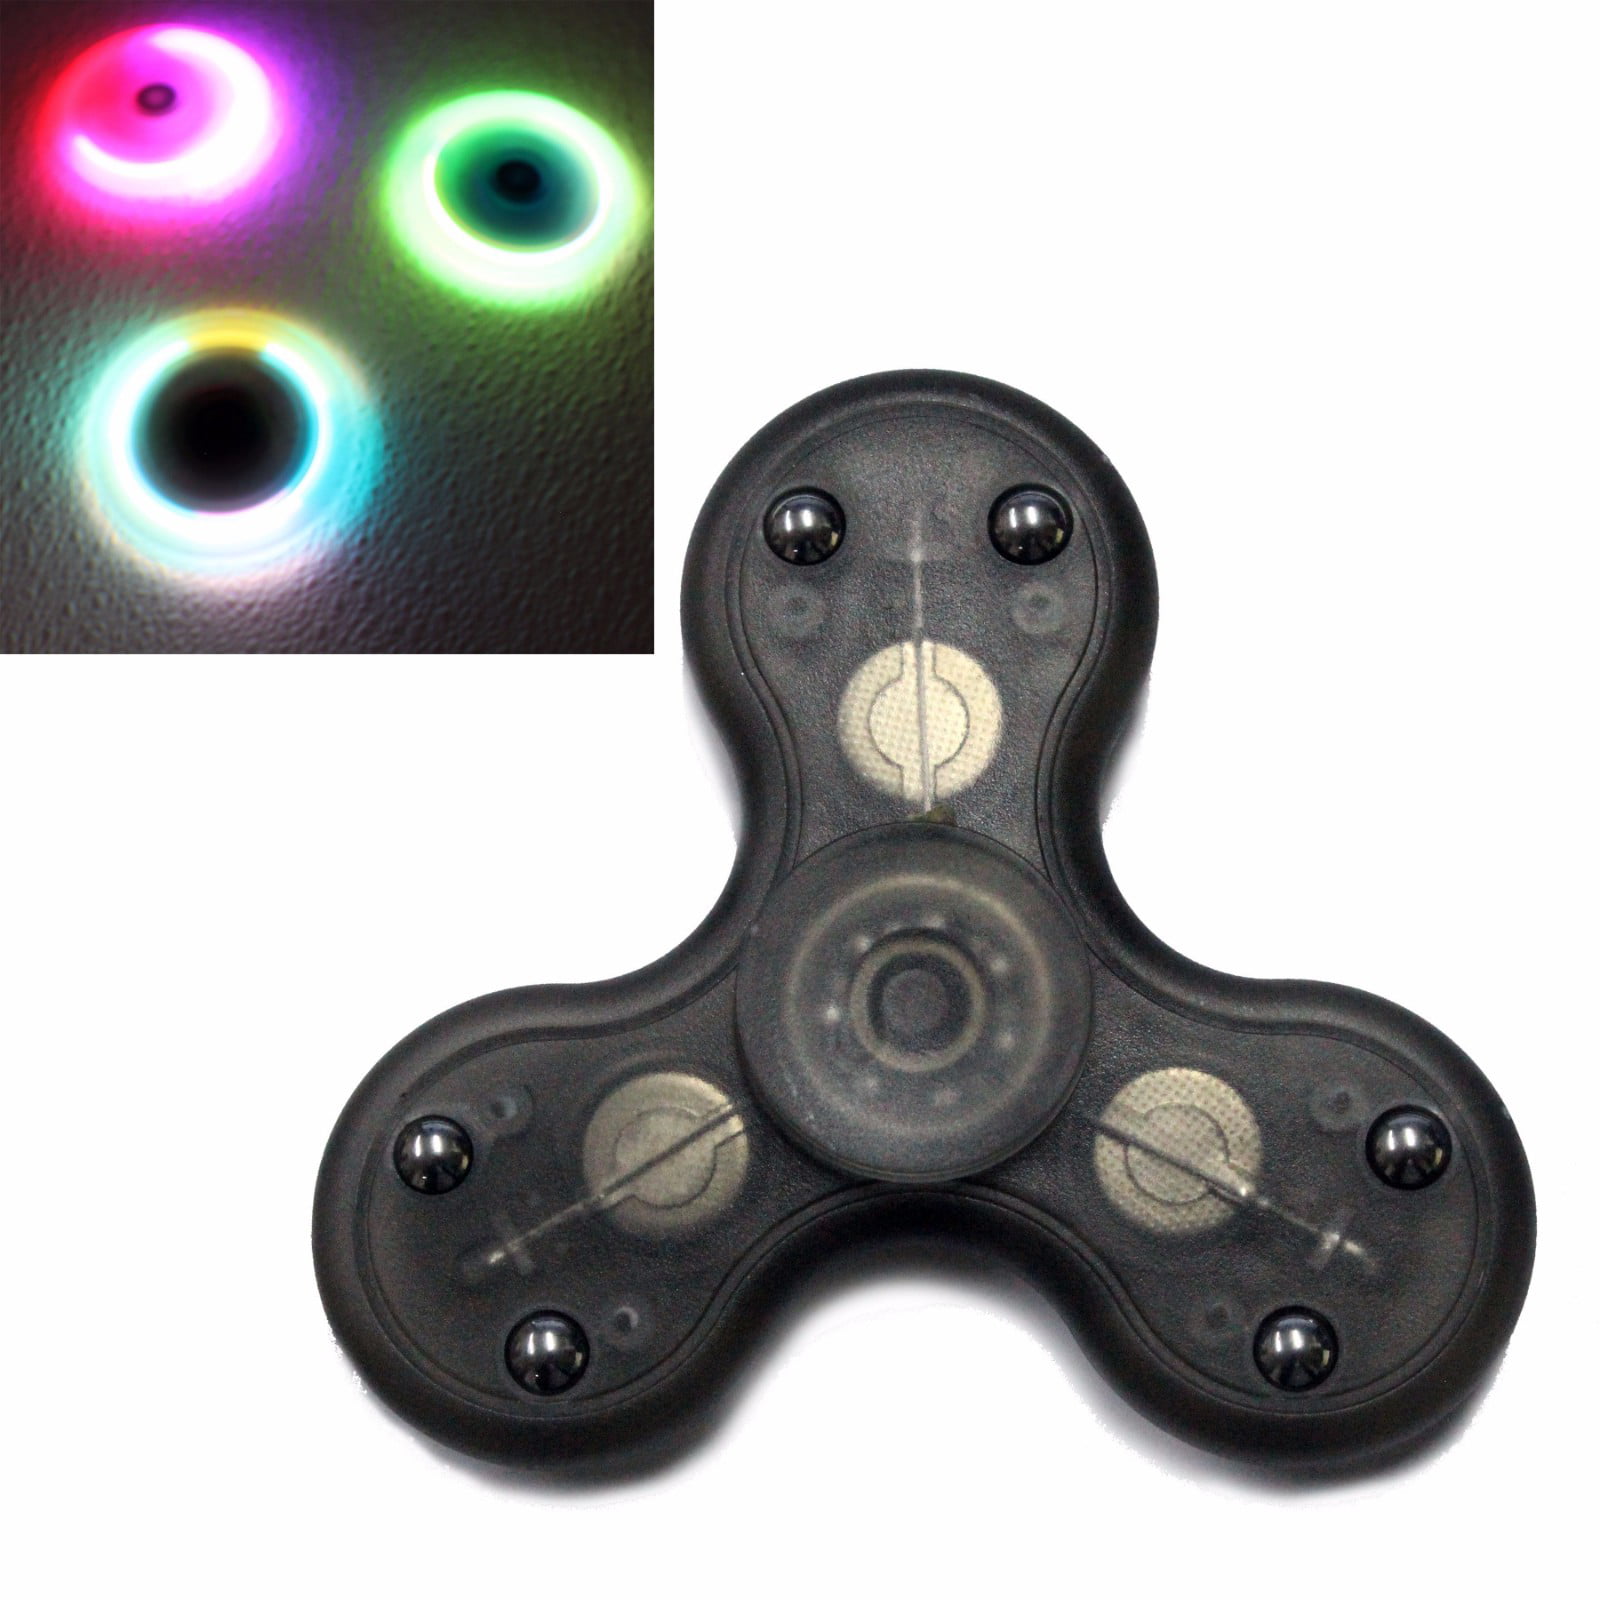 Tri-spiner Hand Finger Spinner EDC Focus Gyro Toy ADD ADHD Stress Reducer Hot